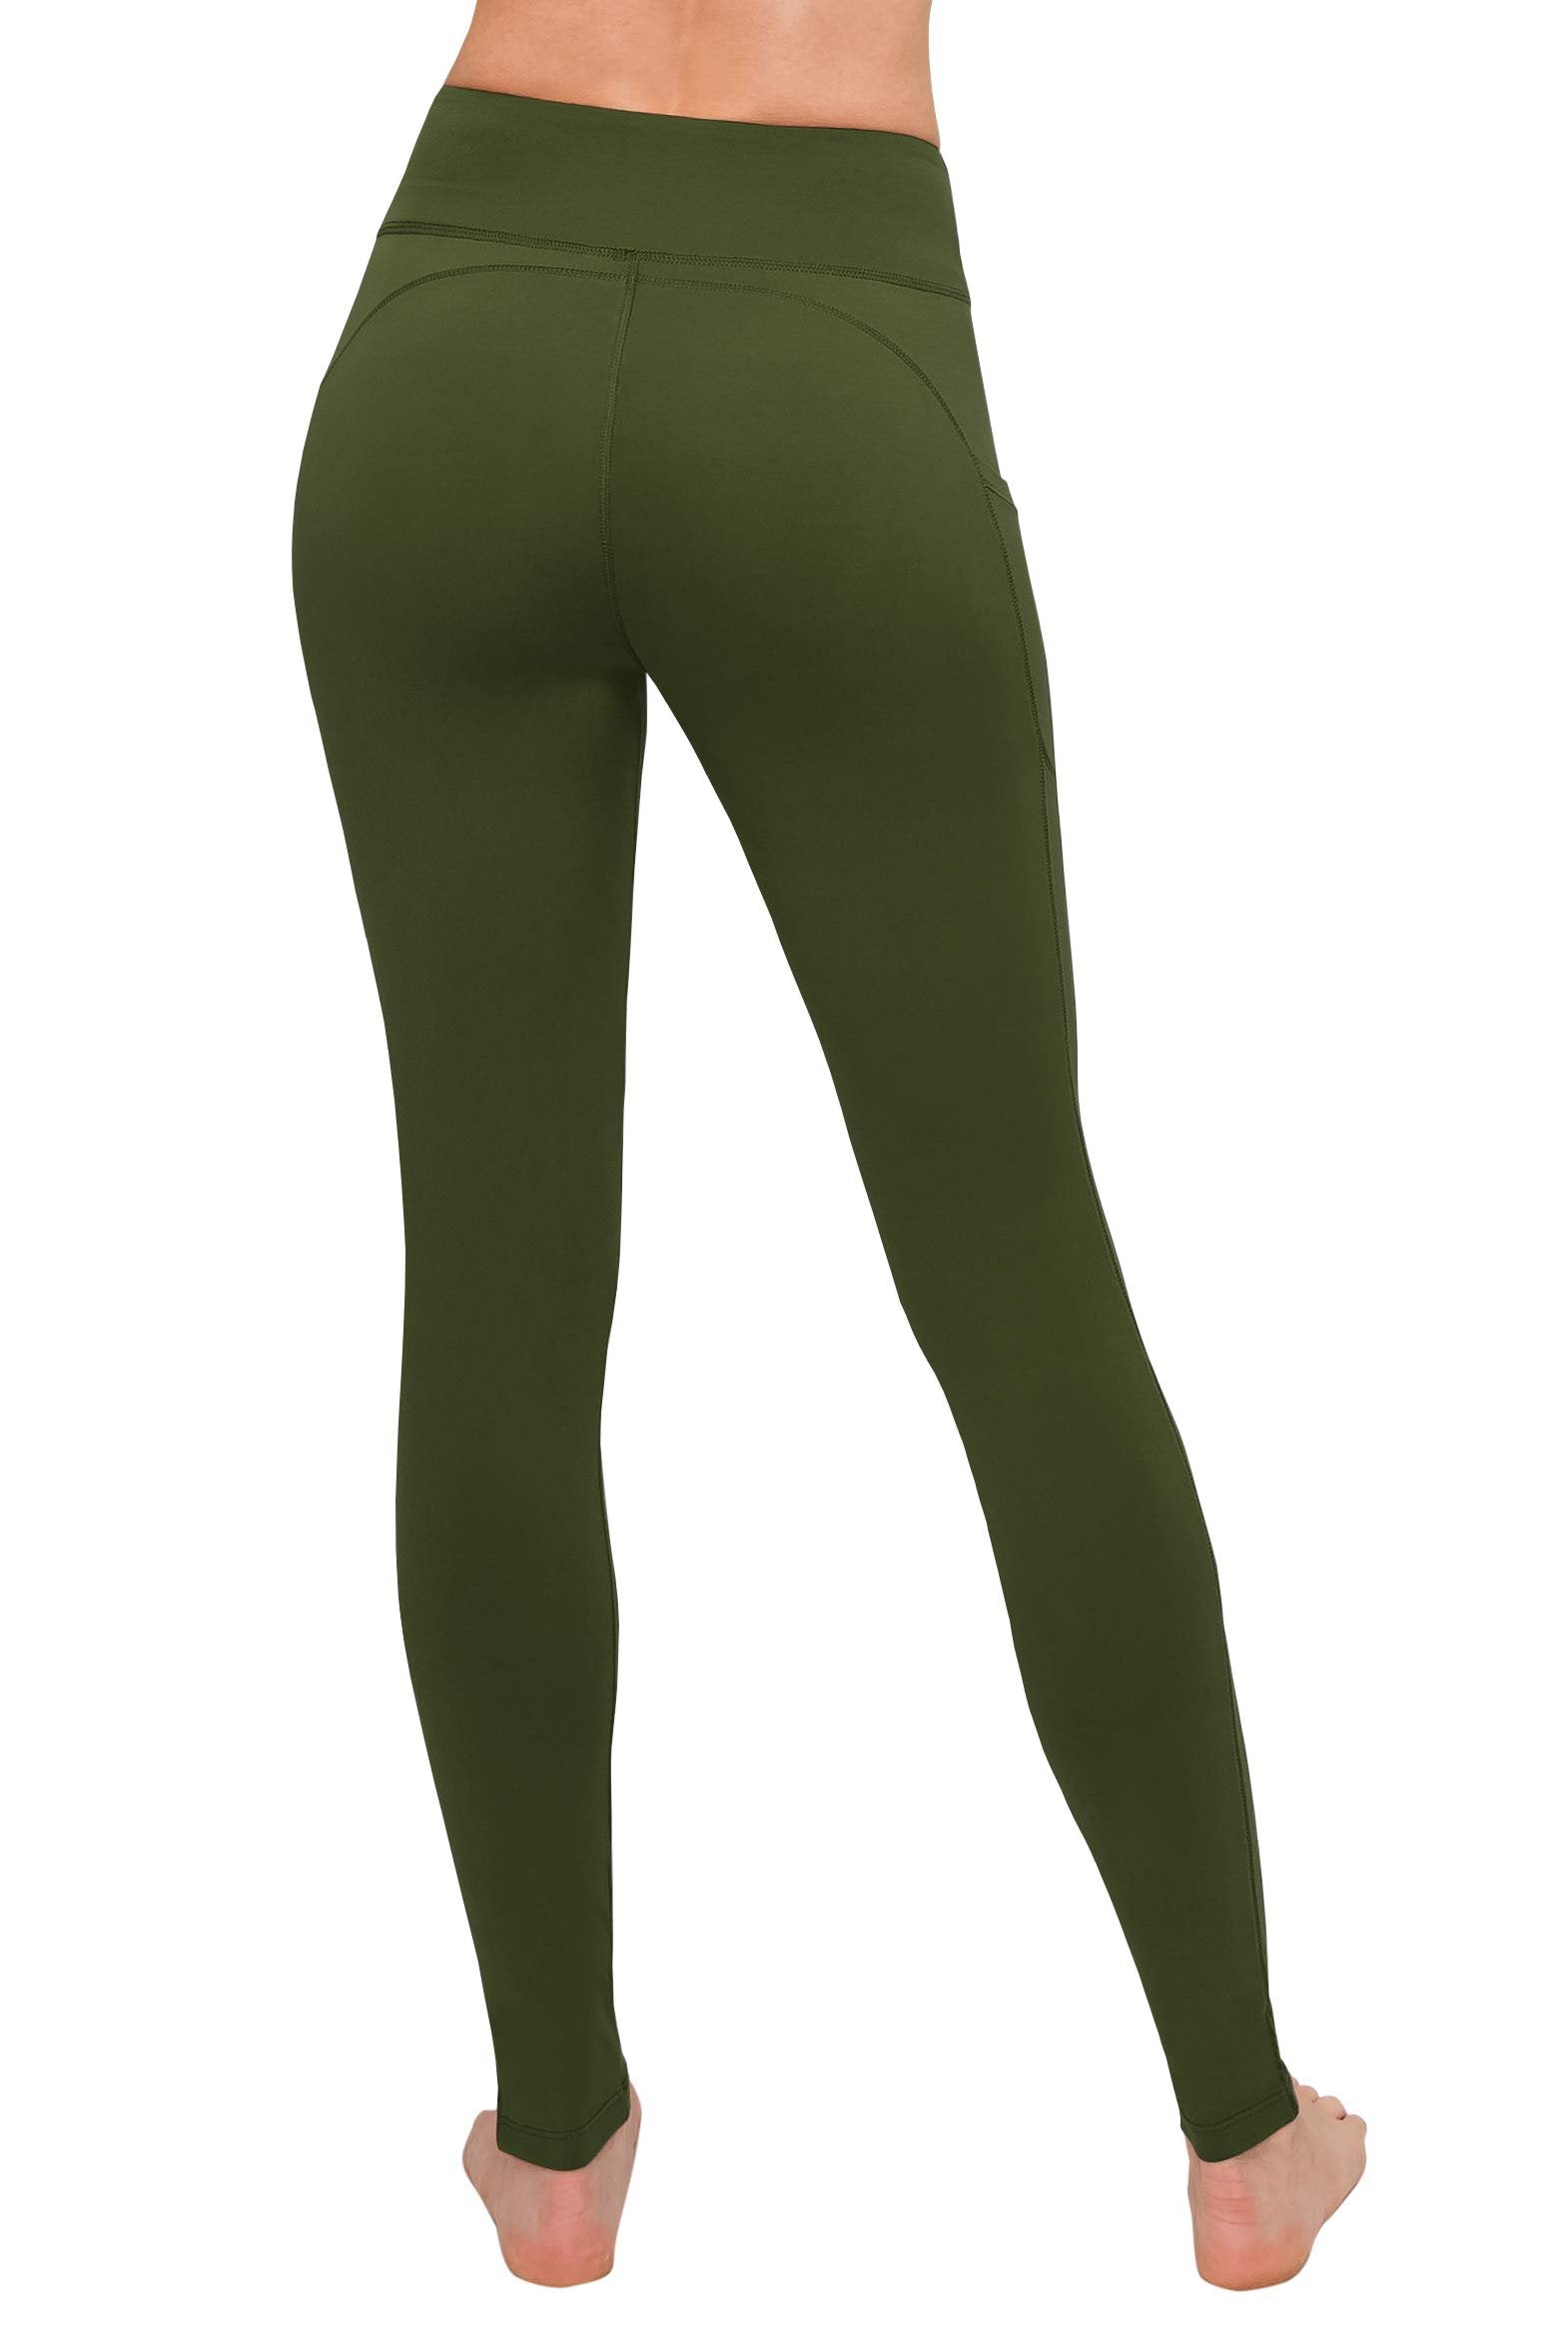 SATINA Olive Leggings for Women with Pockets | High Waisted Workout Leggings | Yoga Leggings for Women | 3 Waistband | Plus and One Size Available